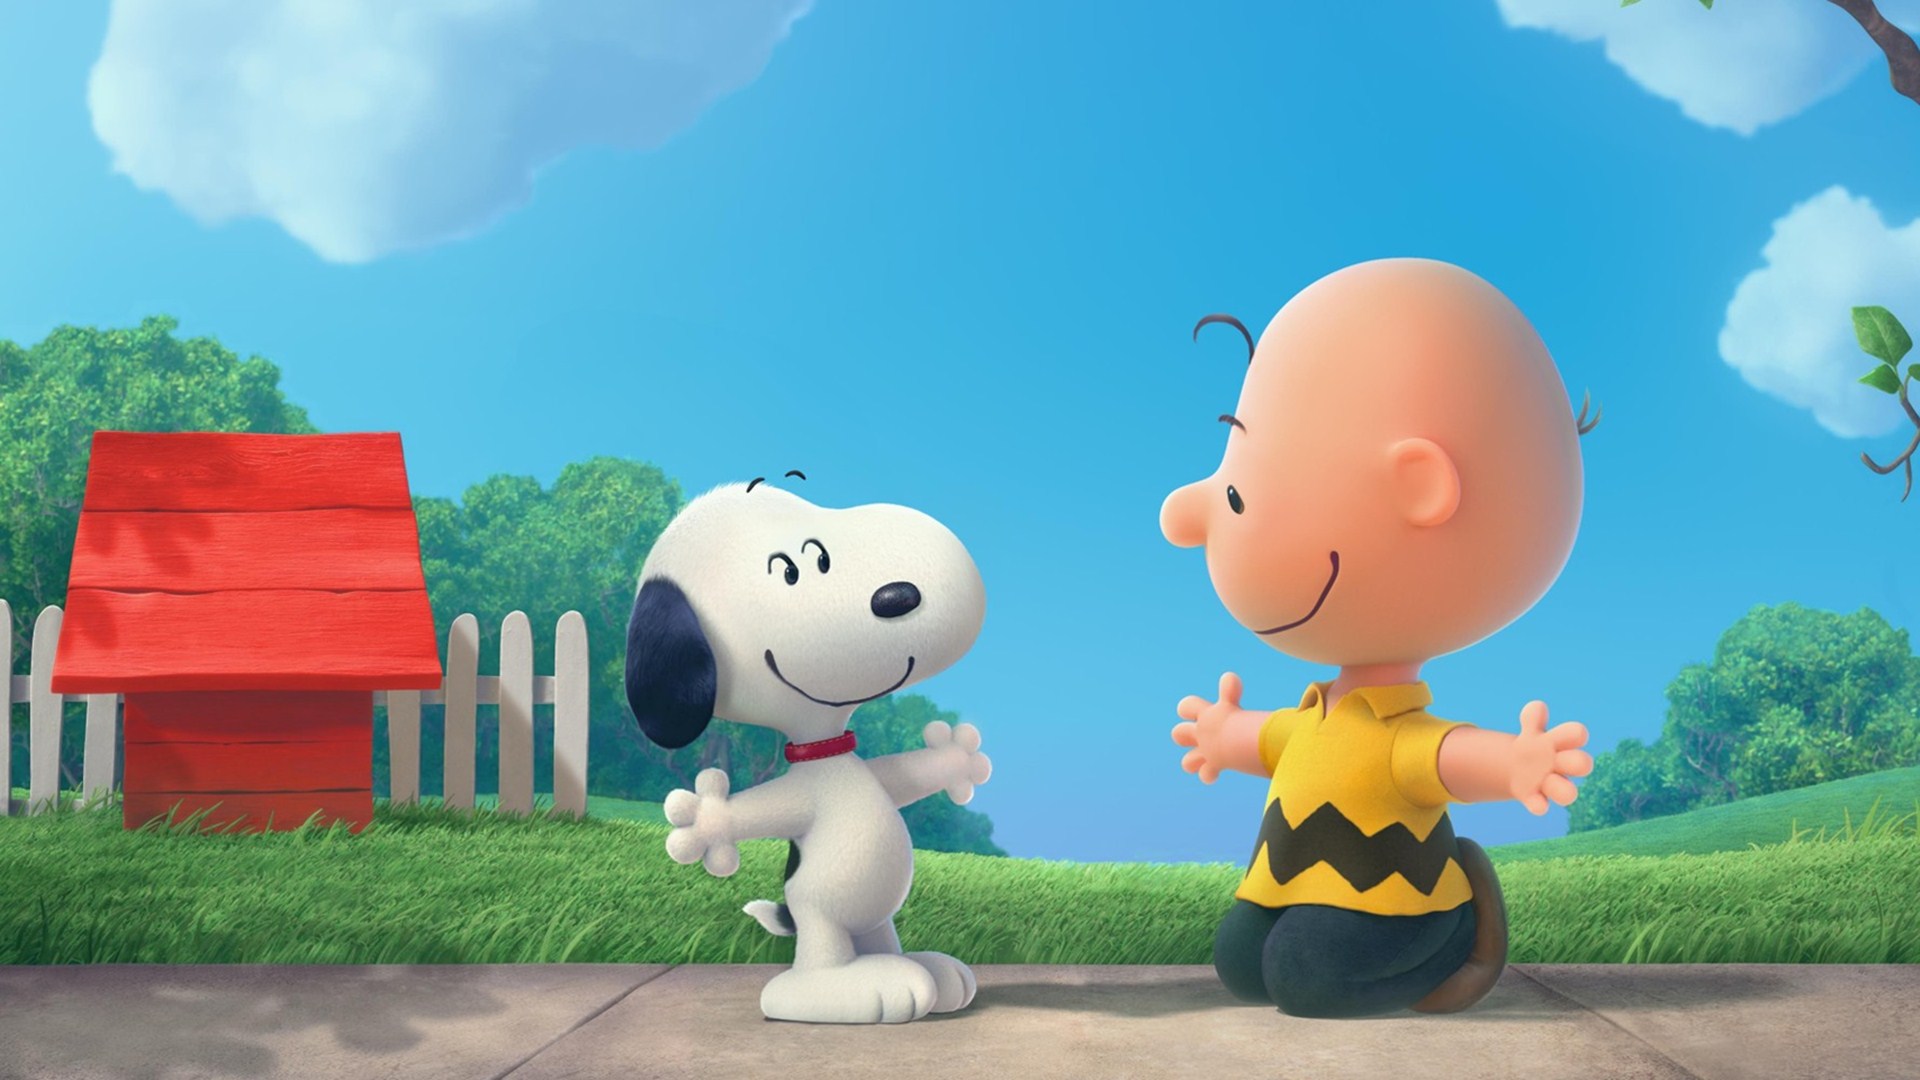 And Charlie Brown The Peanuts Cartoon HD Wallpaper Search more high